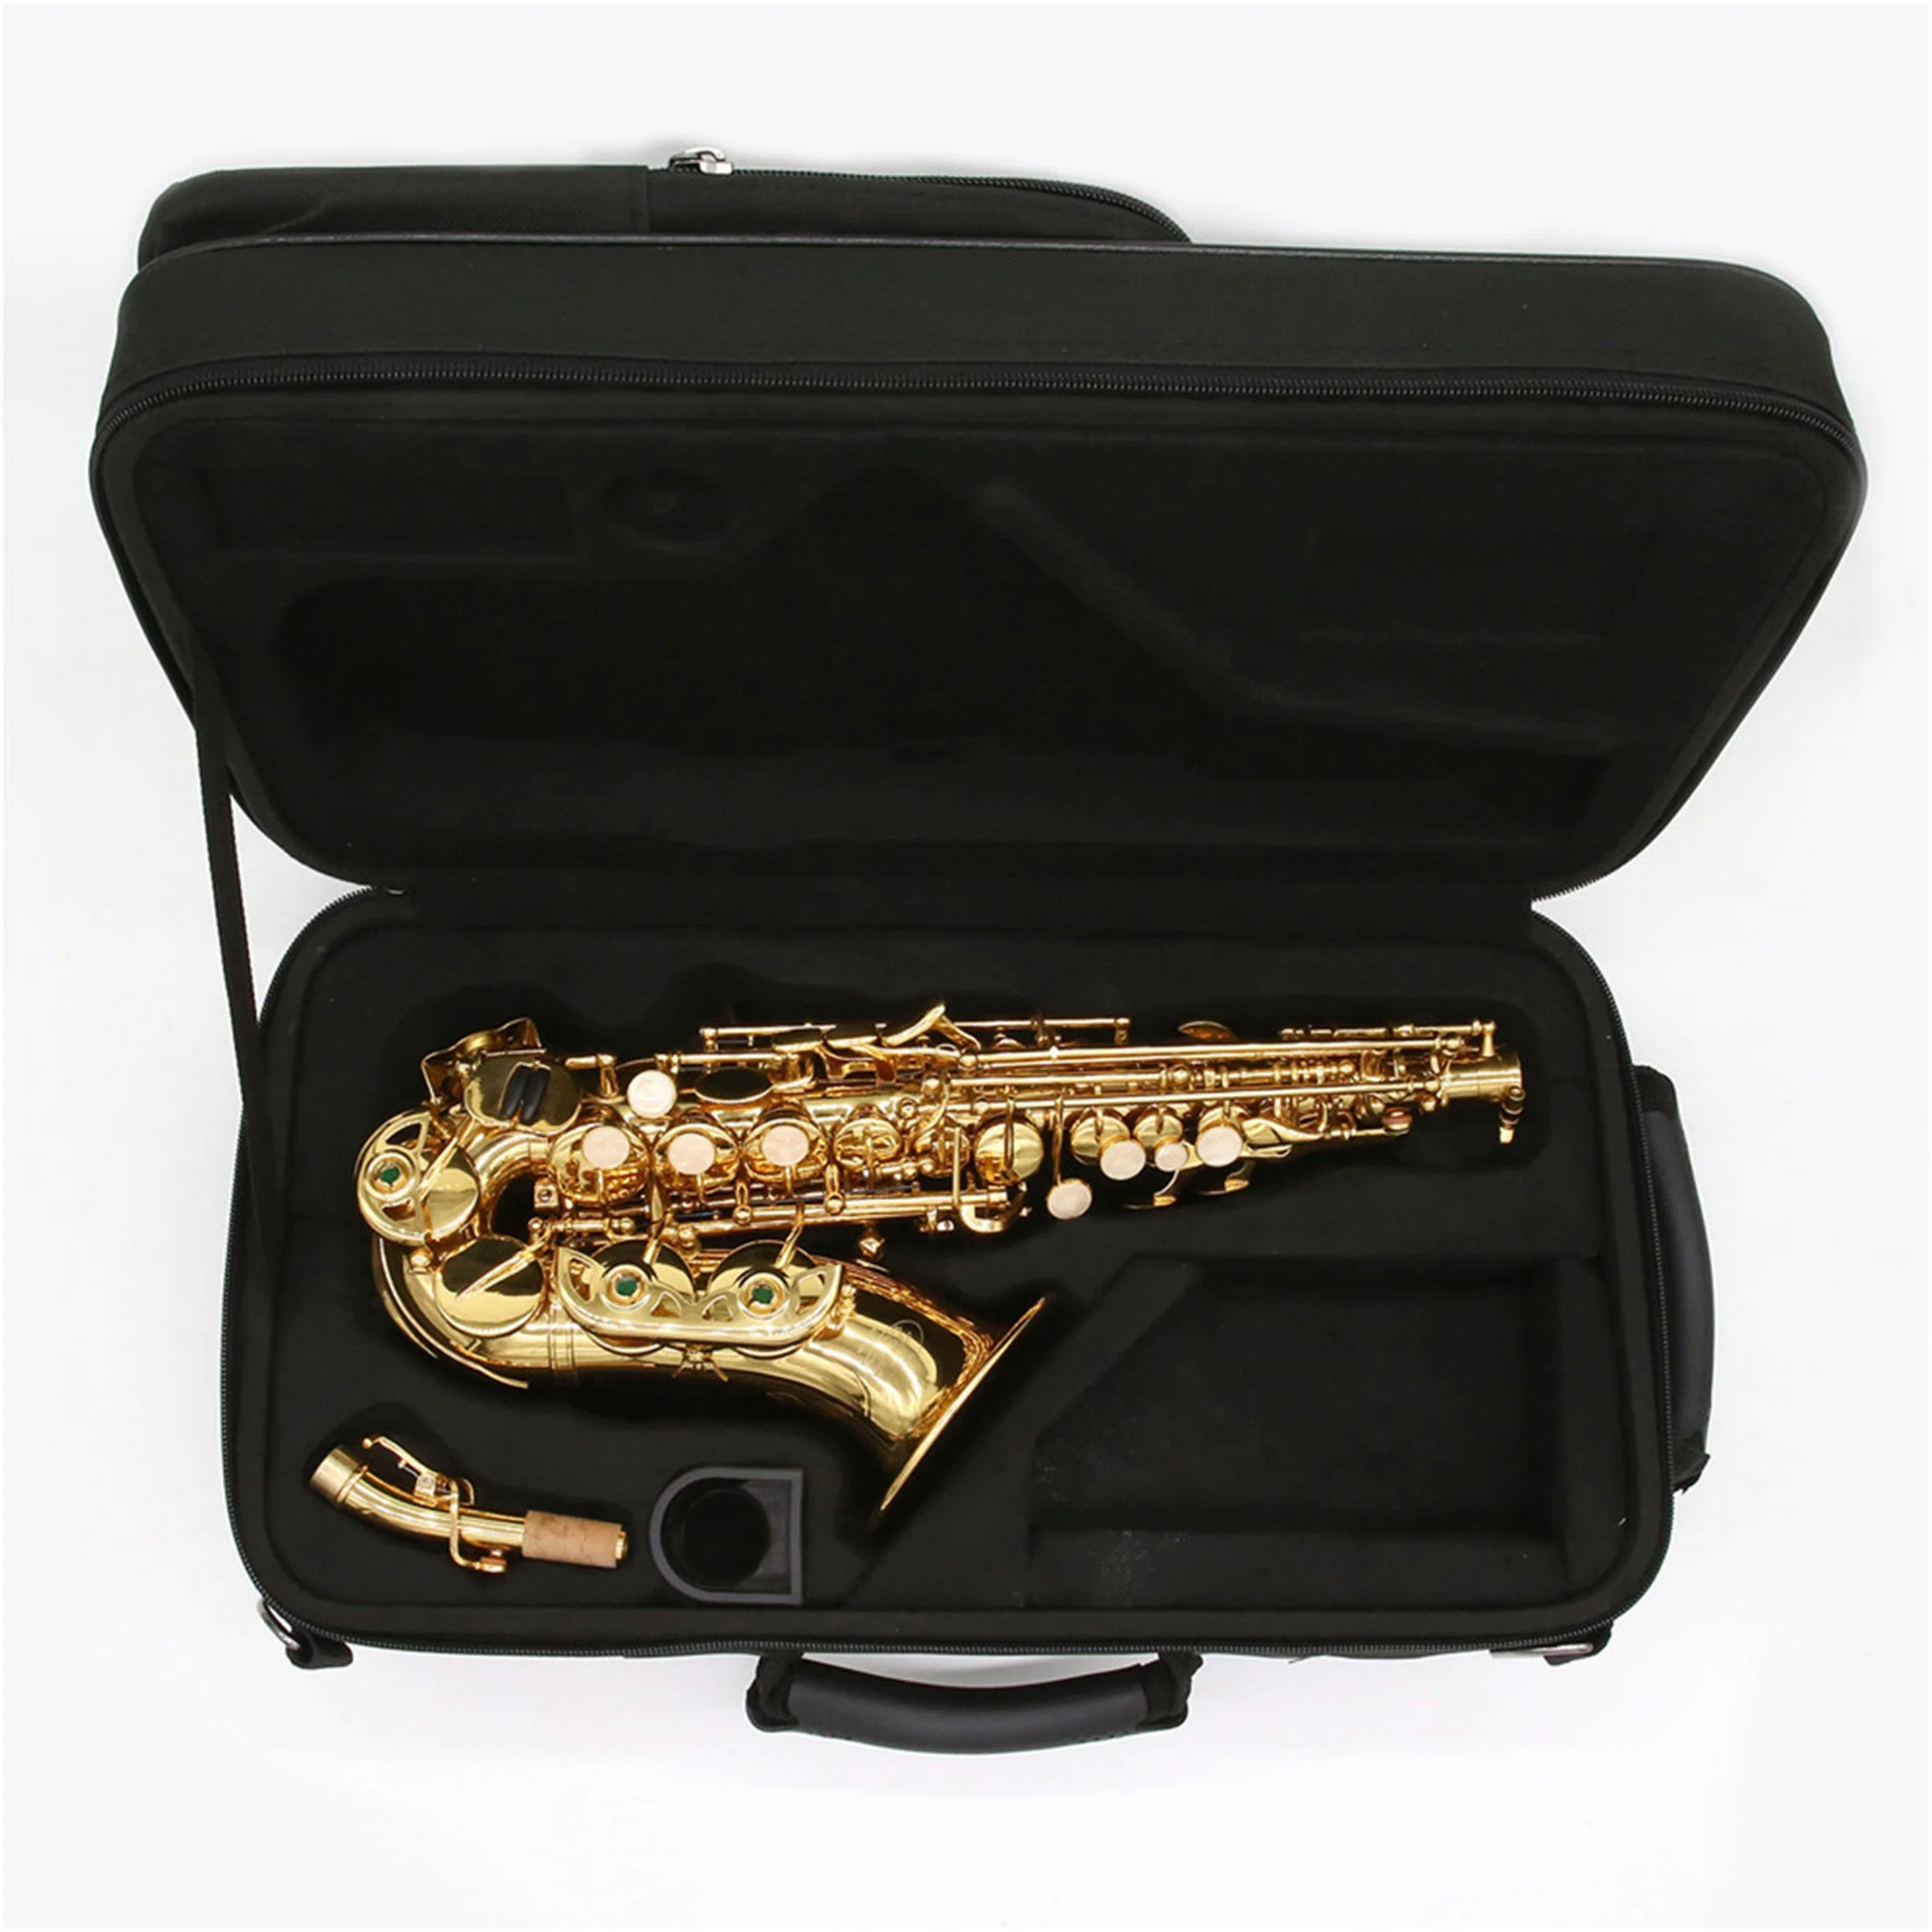 Soprano Sax/ Cheap Gift, Hot Sale Musical Instrument, Made in China